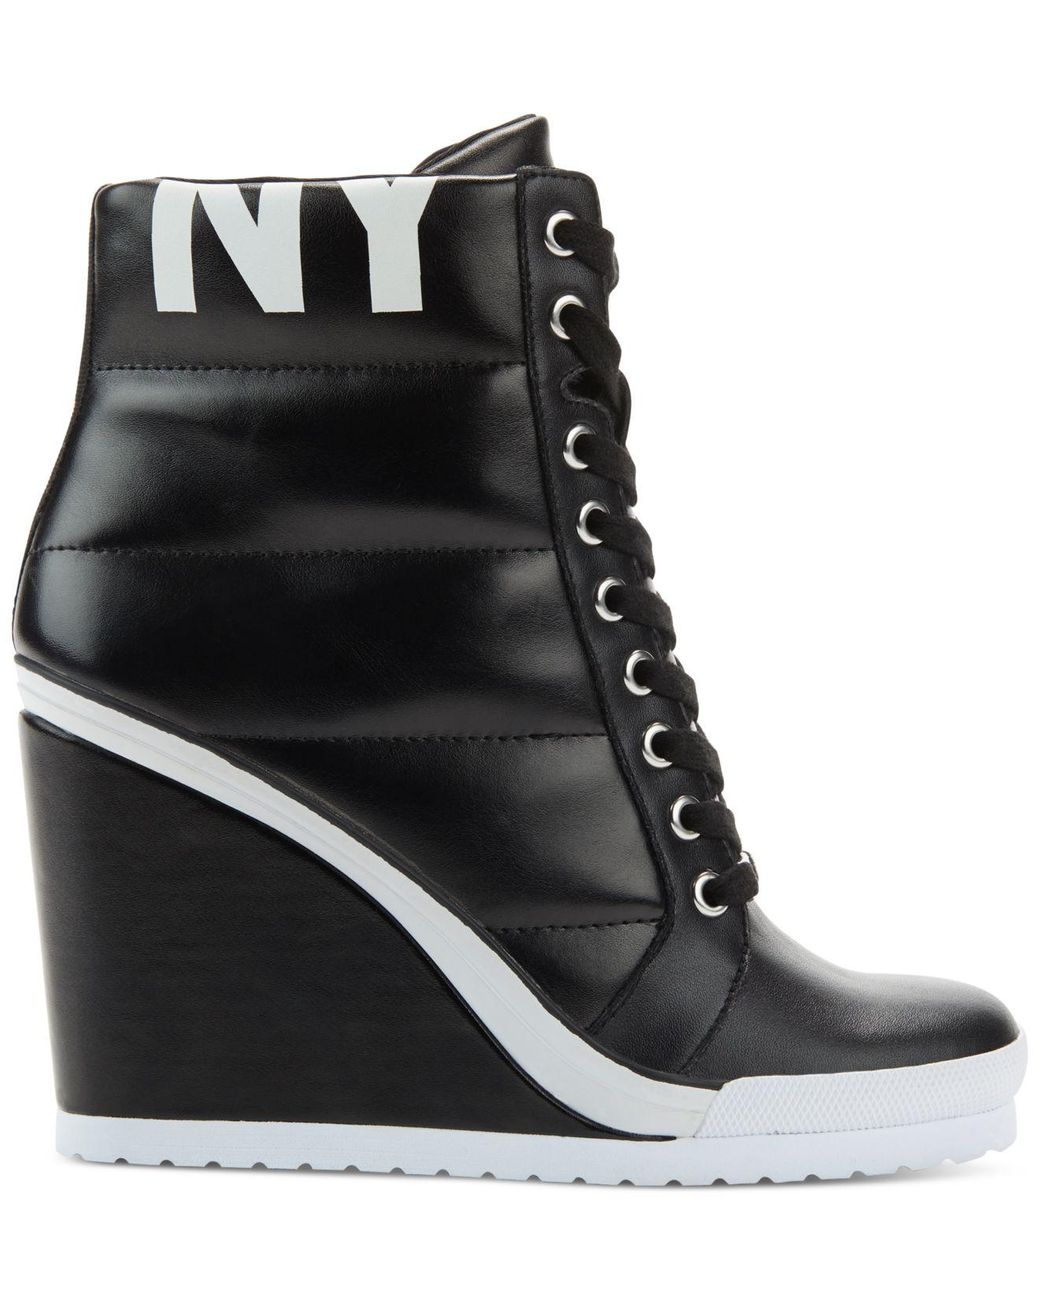 DKNY Angie Slip-On Wedge Sneakers | Wedge sneakers, Sporty chic style, Slip  on